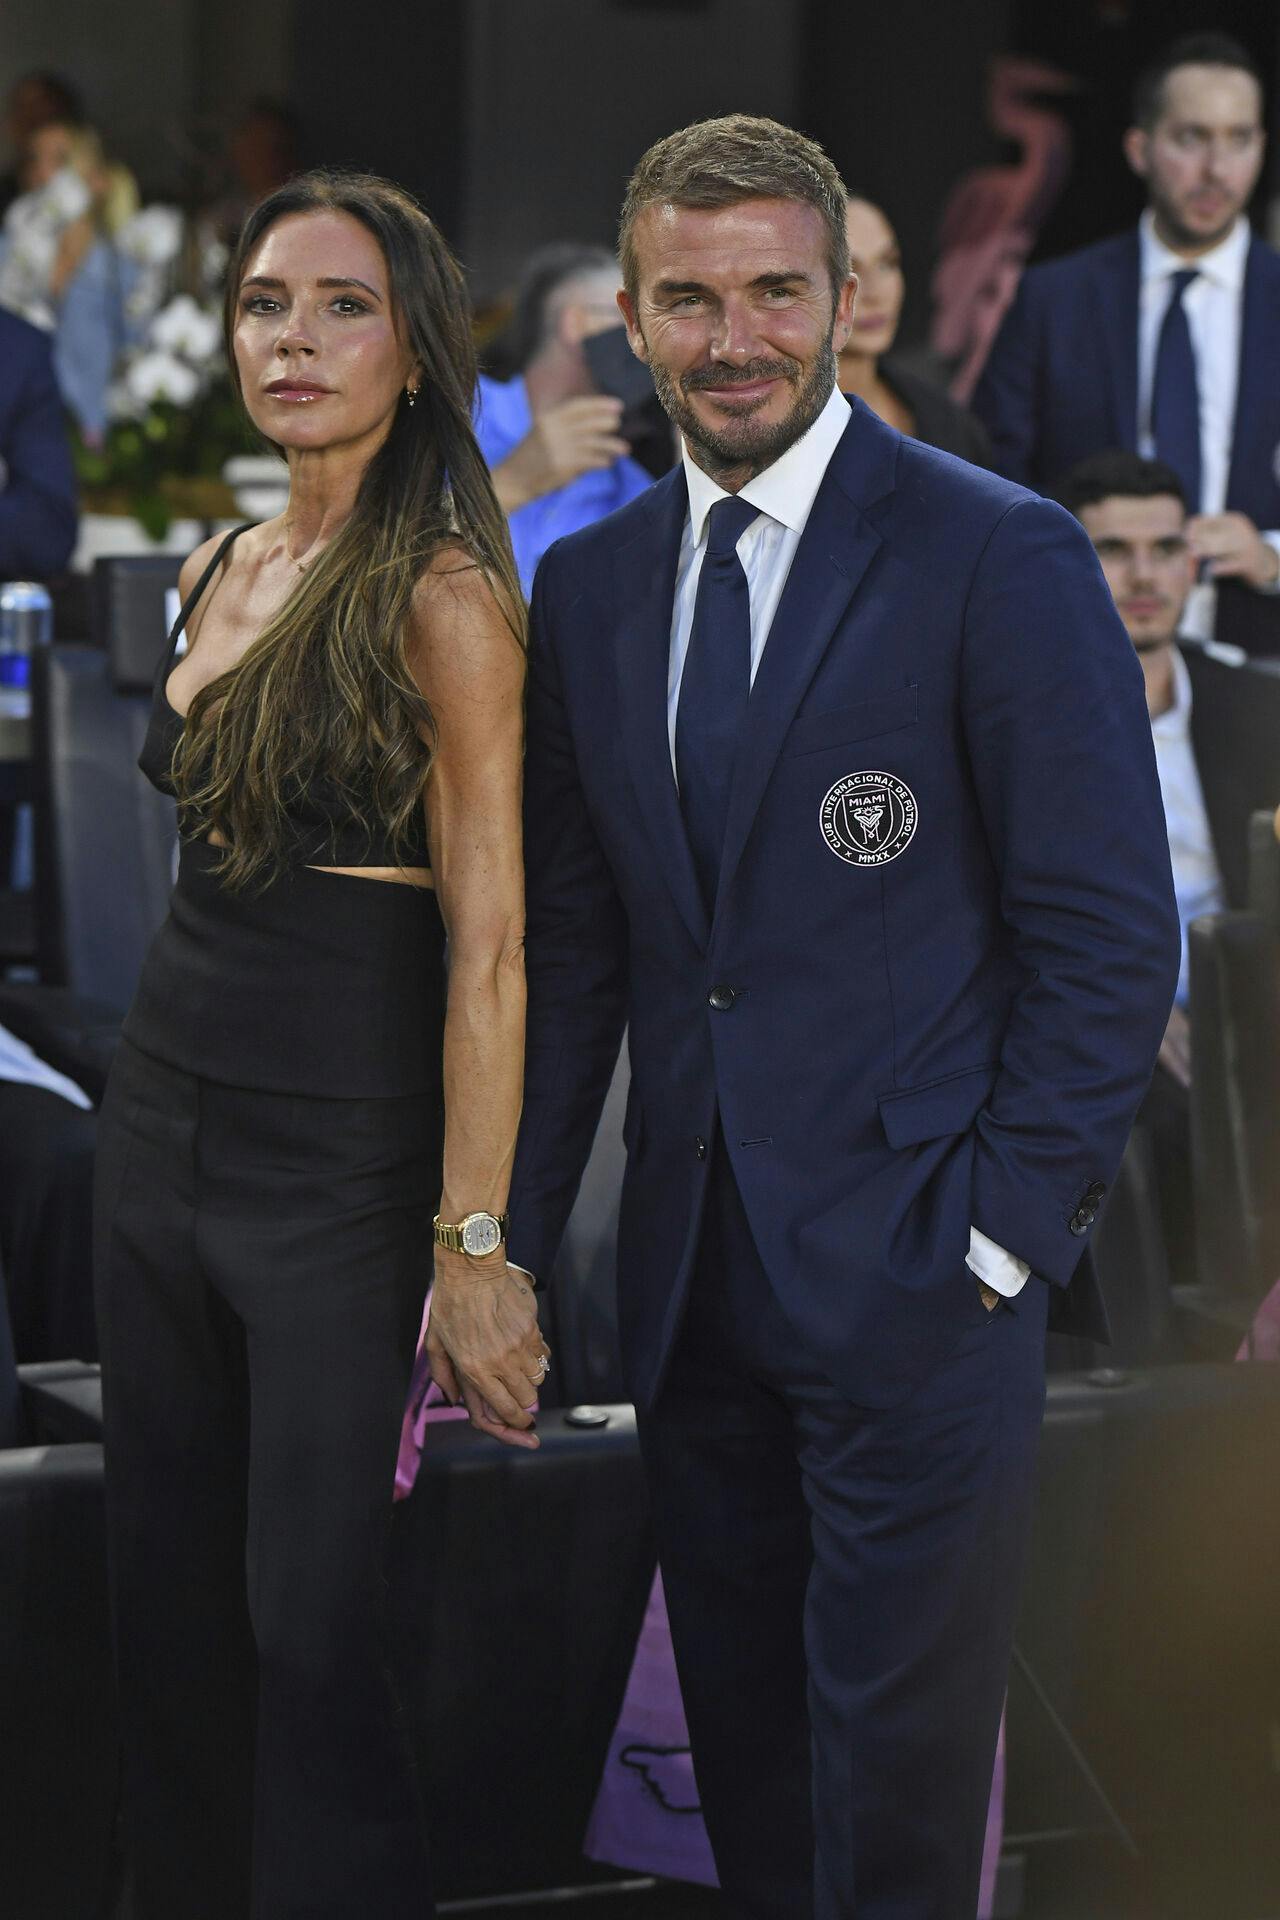 FORT LAUDERDALE FL - JULY 21: David Beckham and Victoria Beckham are seen as Lionel Messi of Inter Miami CF plays during his first game in a League's Cup match against against Cruz Azul at DRV PNK Stadium on July 21, 2023 in Fort Lauderdale, Florida. Credit: mpi04/MediaPunch /IPX